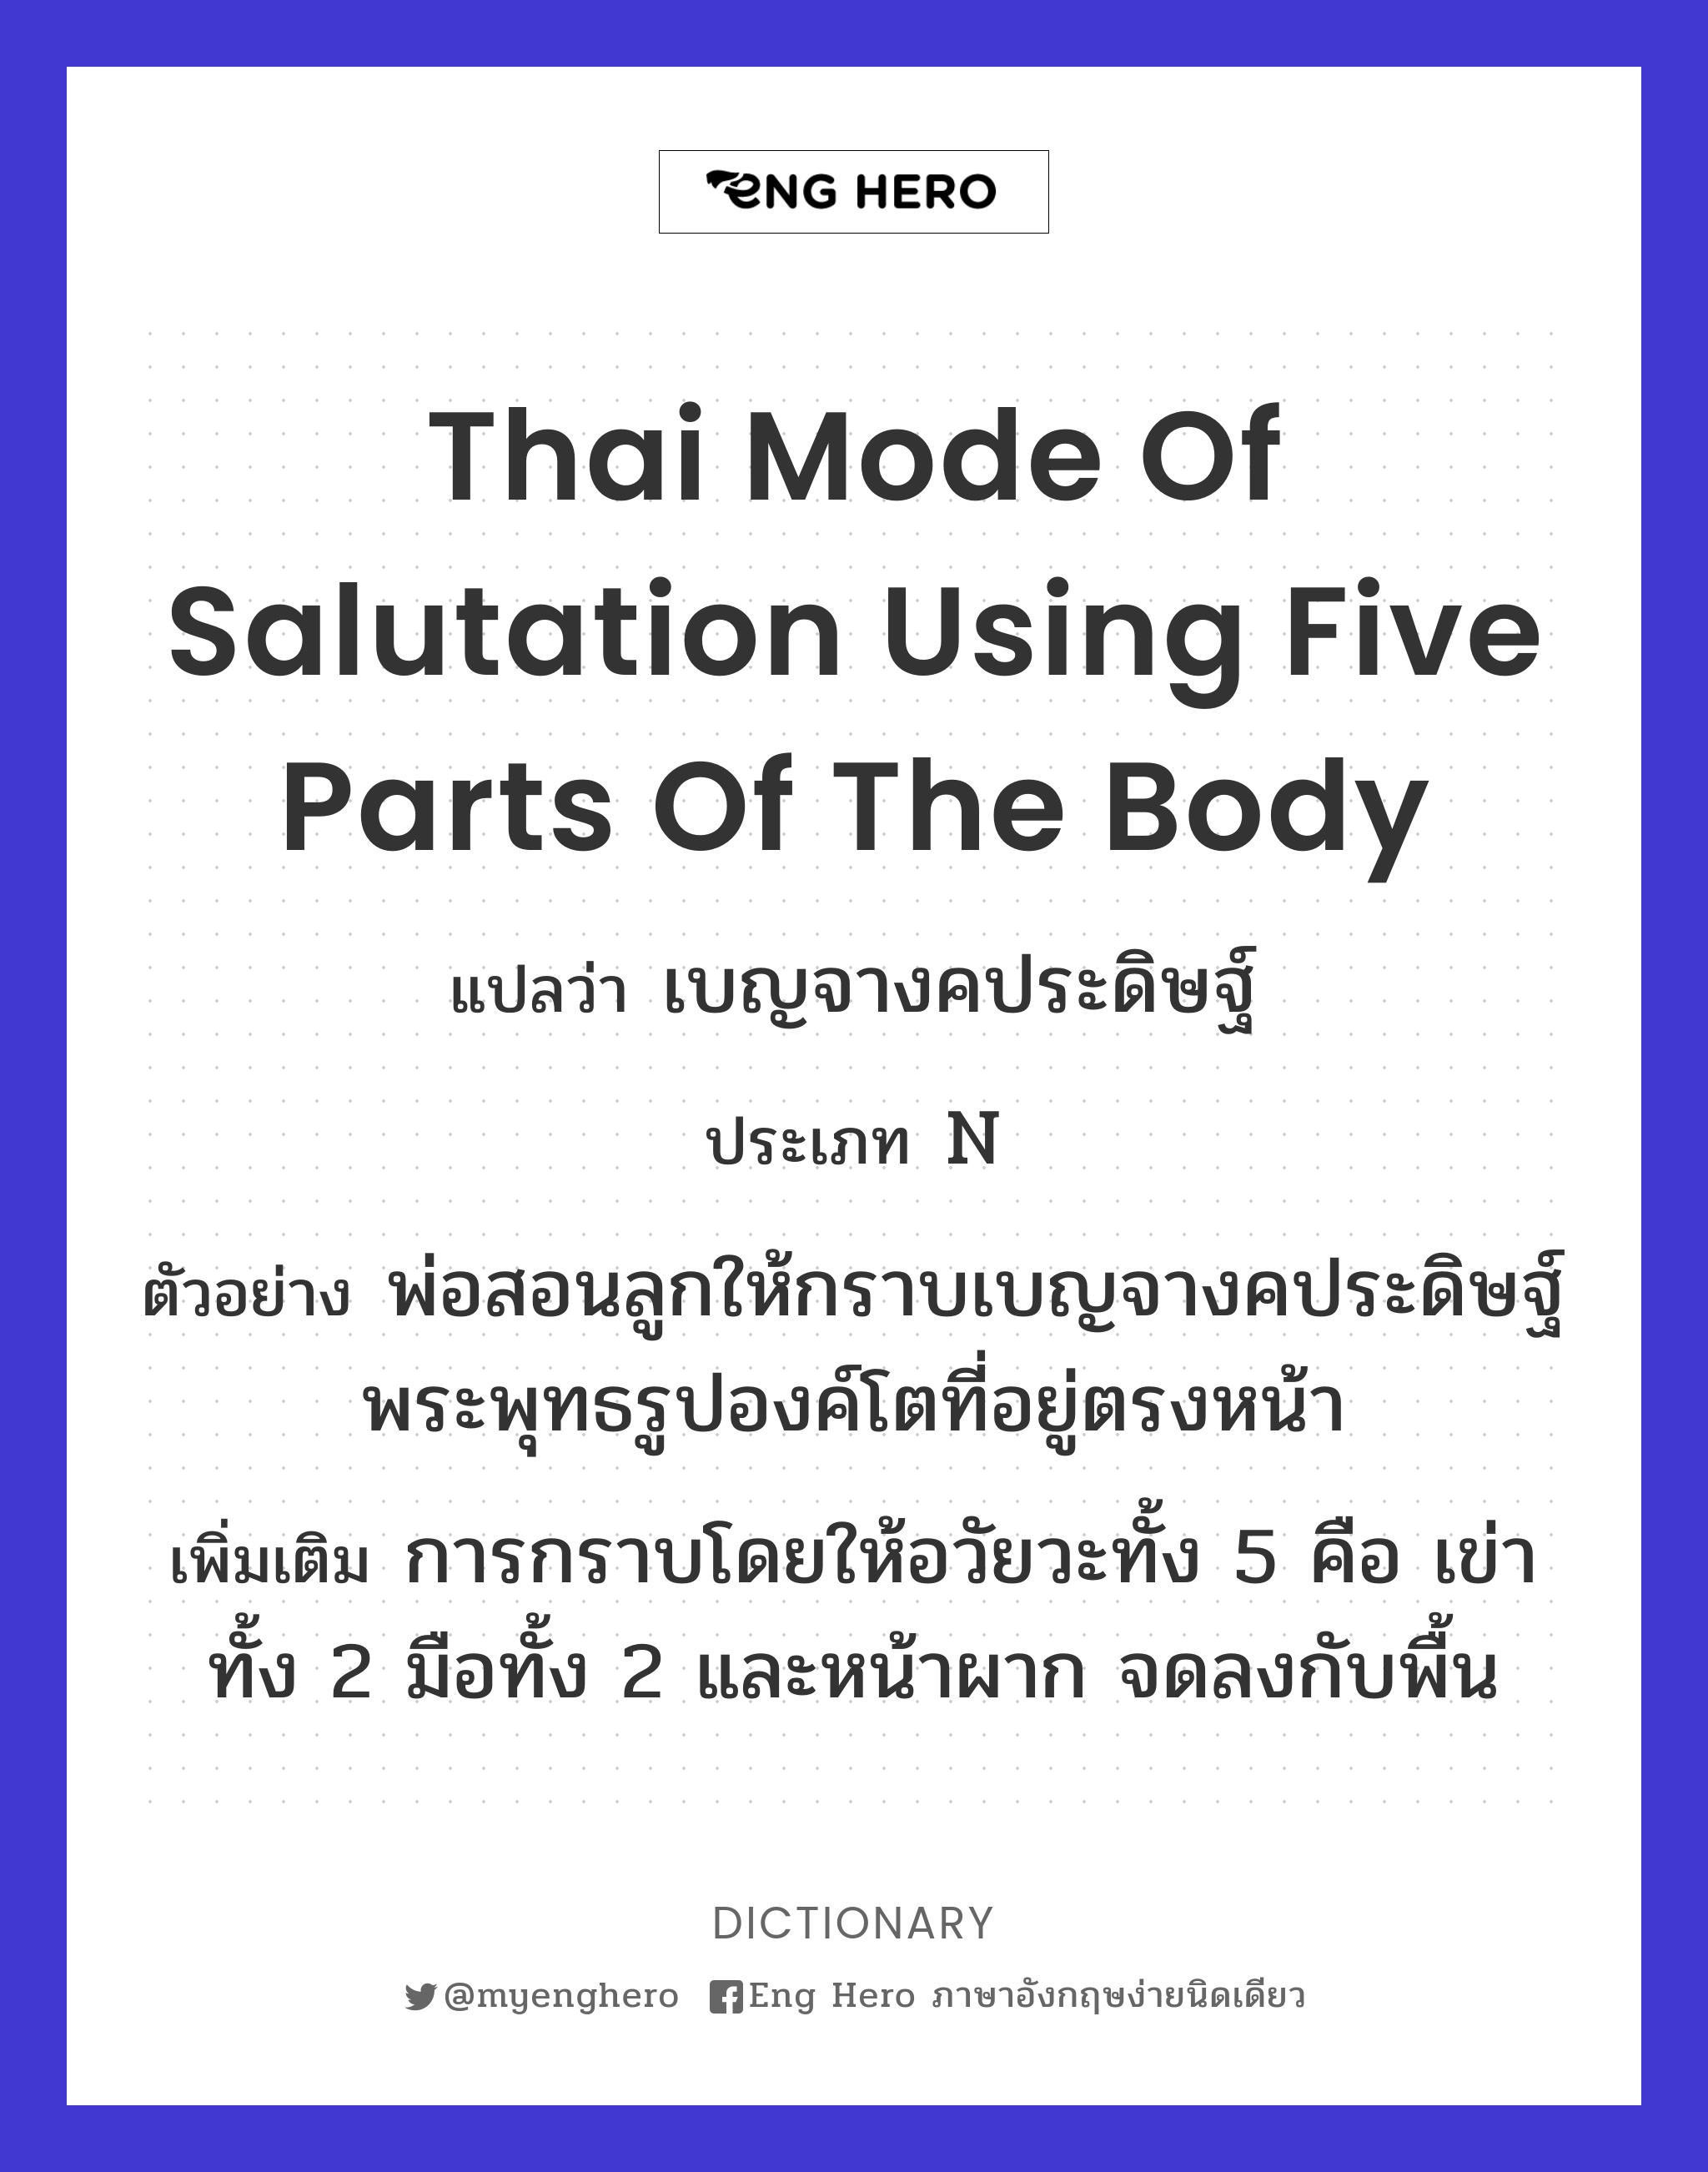 Thai mode of salutation using five parts of the body